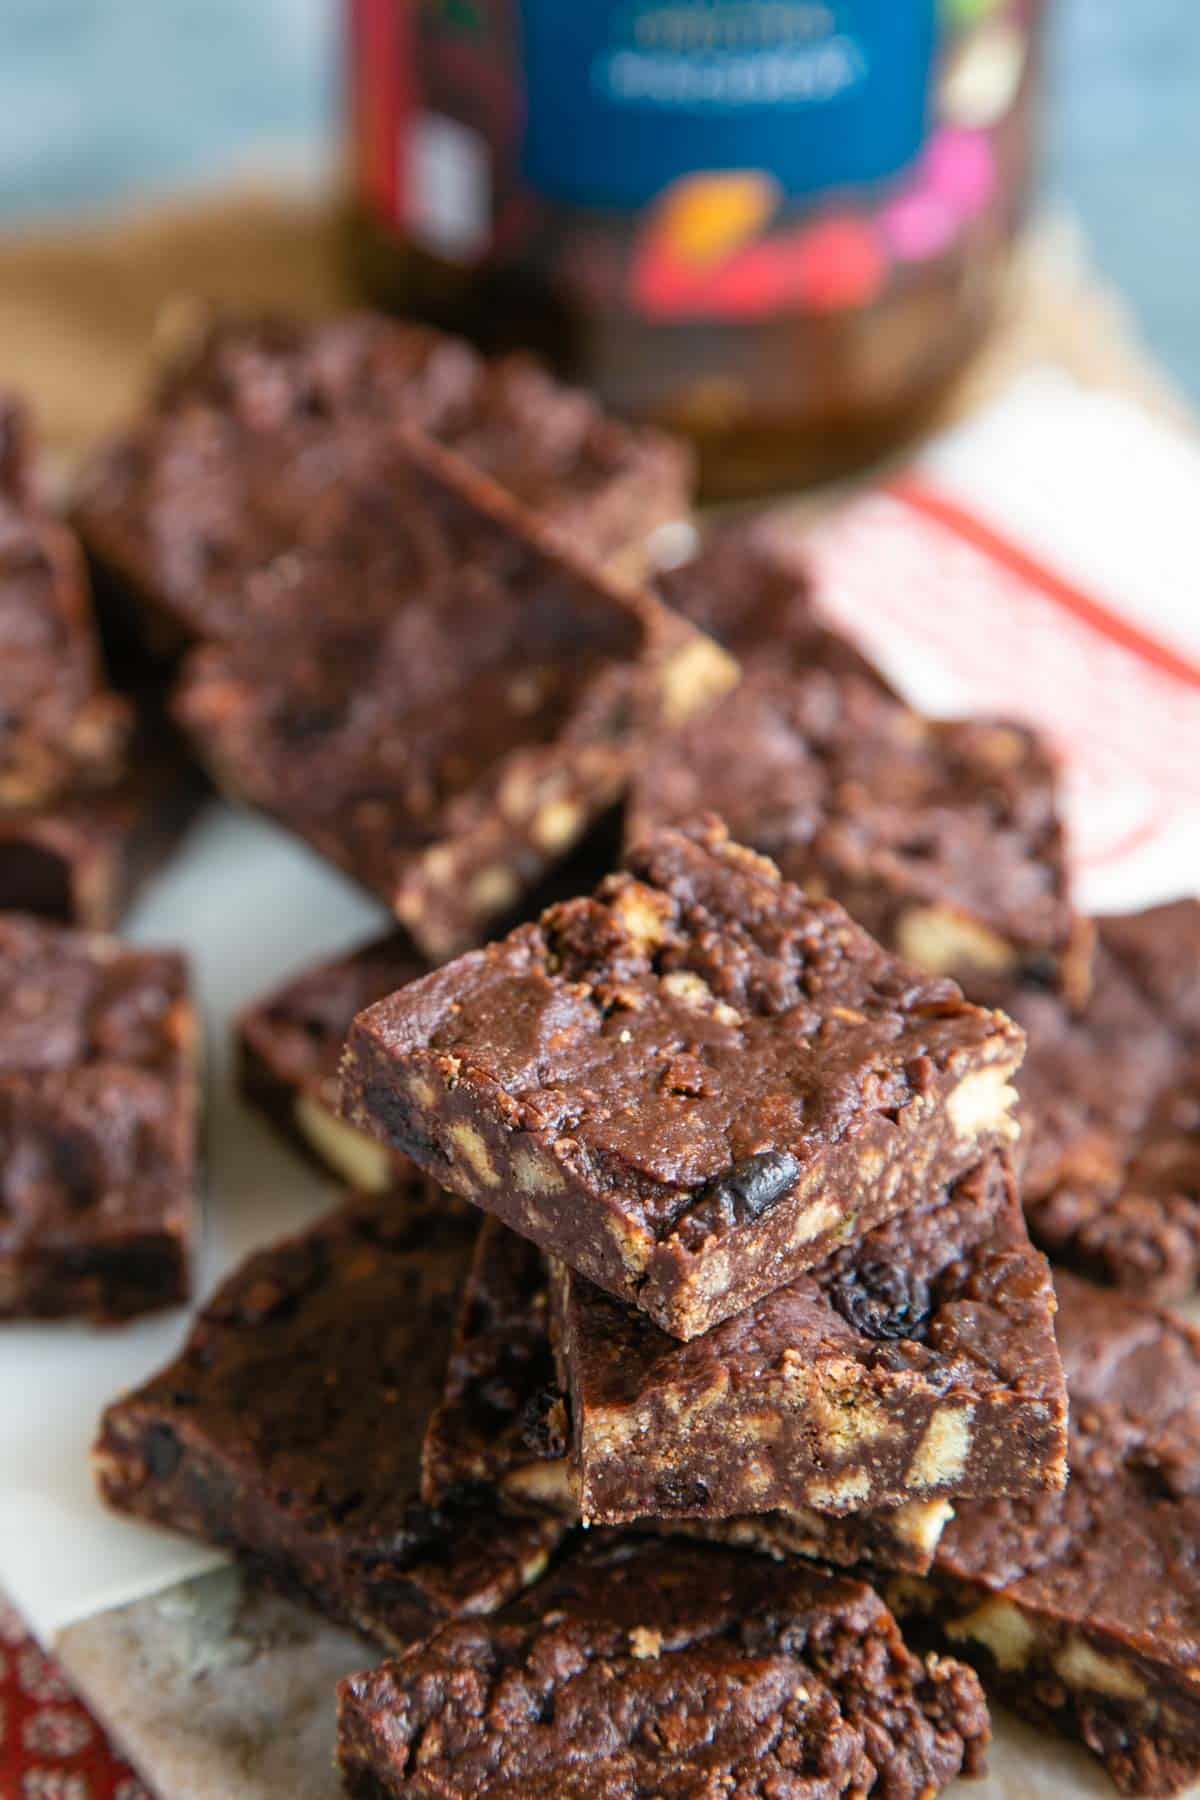 Mincemeat tiffin sqaures laid out on a platter, dark chocolatey slices flecked with biscuit and juicy fruit.